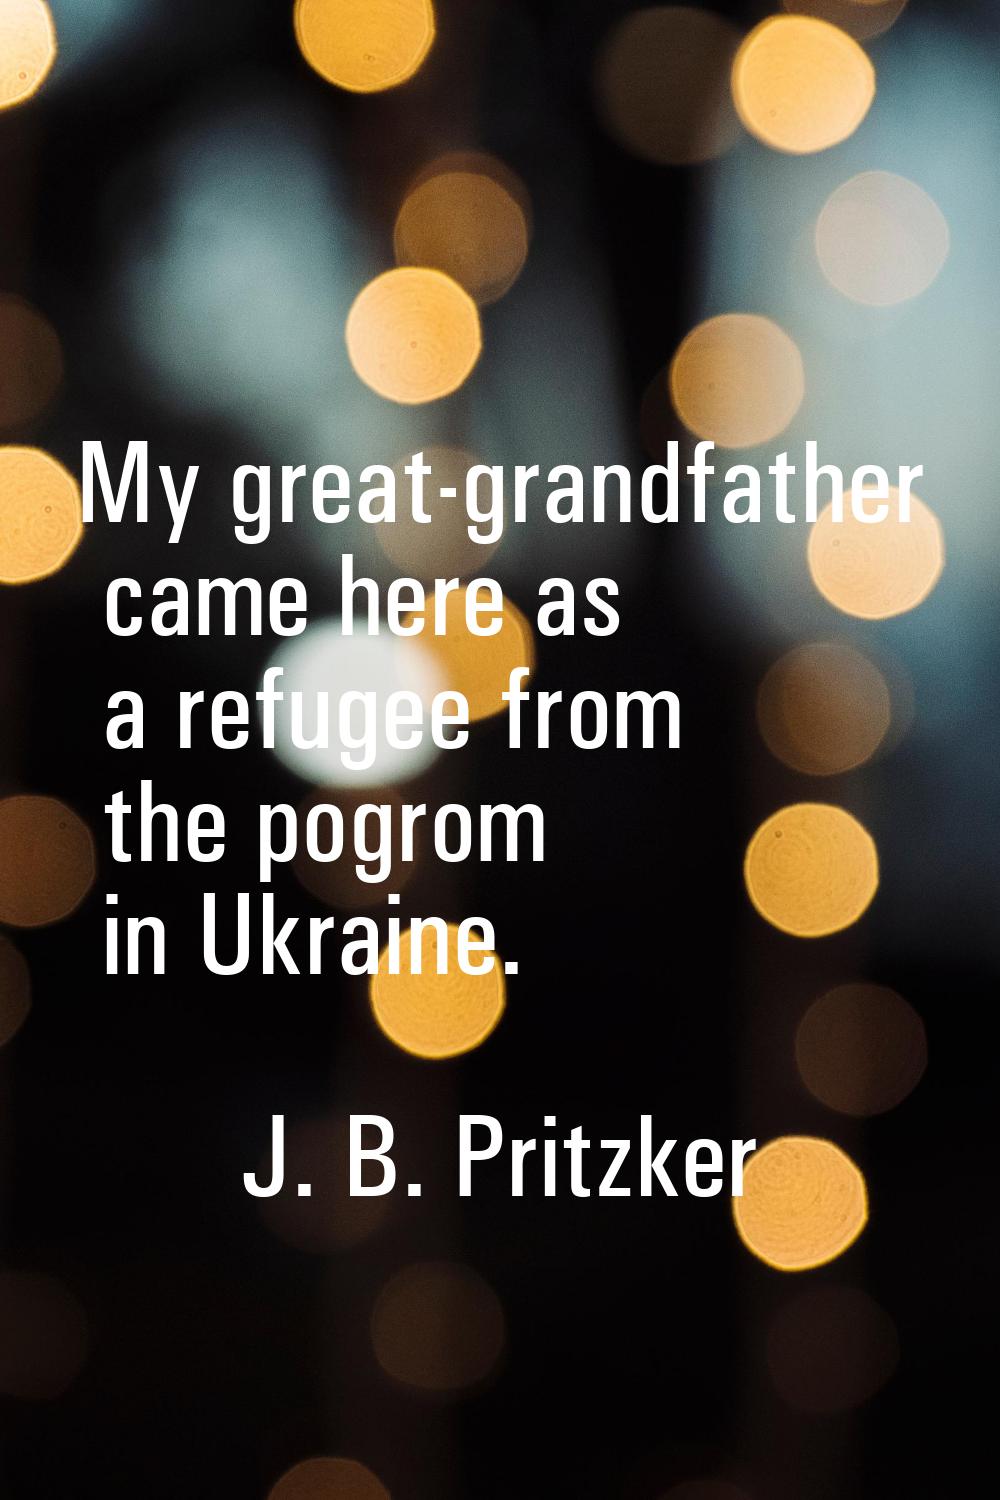 My great-grandfather came here as a refugee from the pogrom in Ukraine.